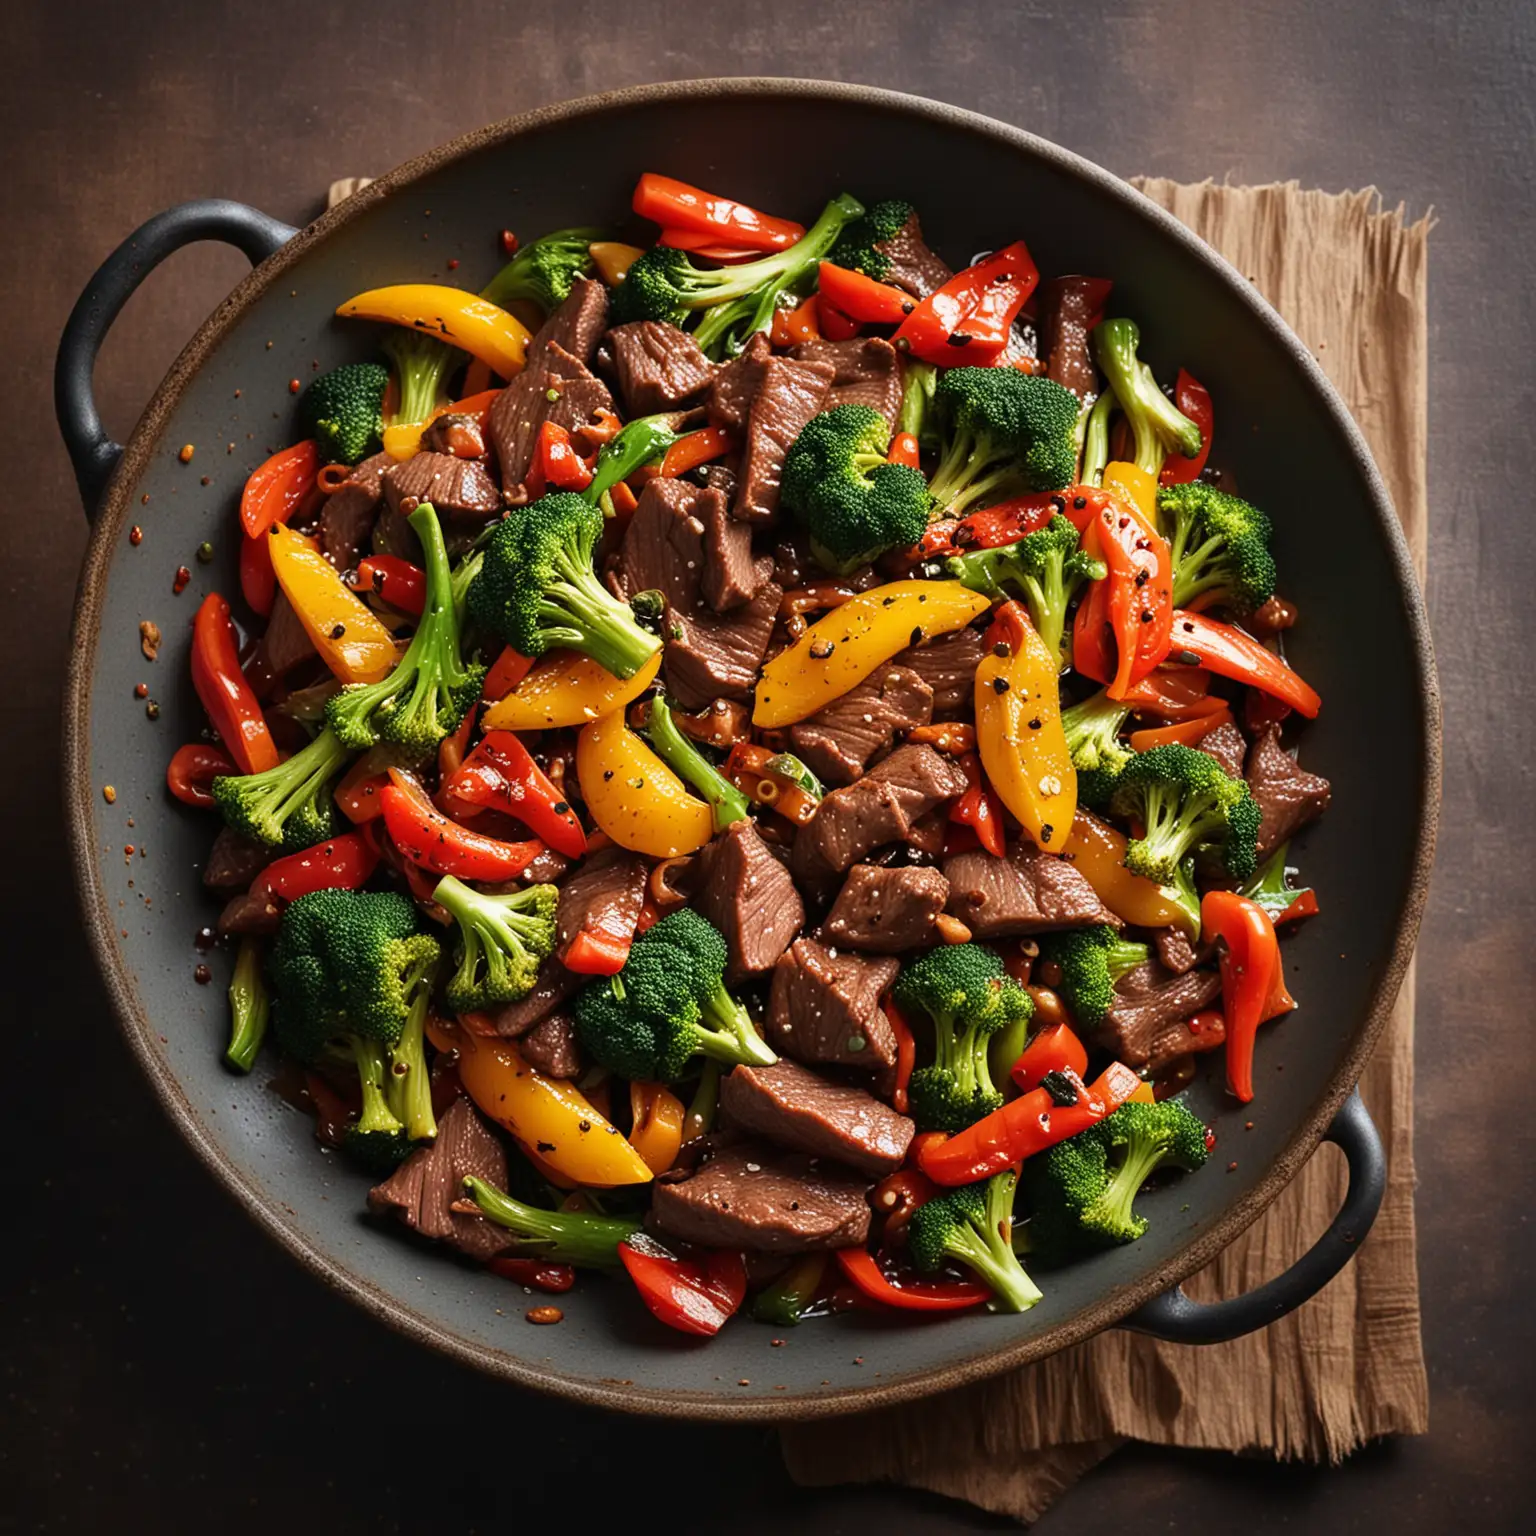 Savory Beef StirFry with Colorful Mixed Bell Peppers and Broccoli